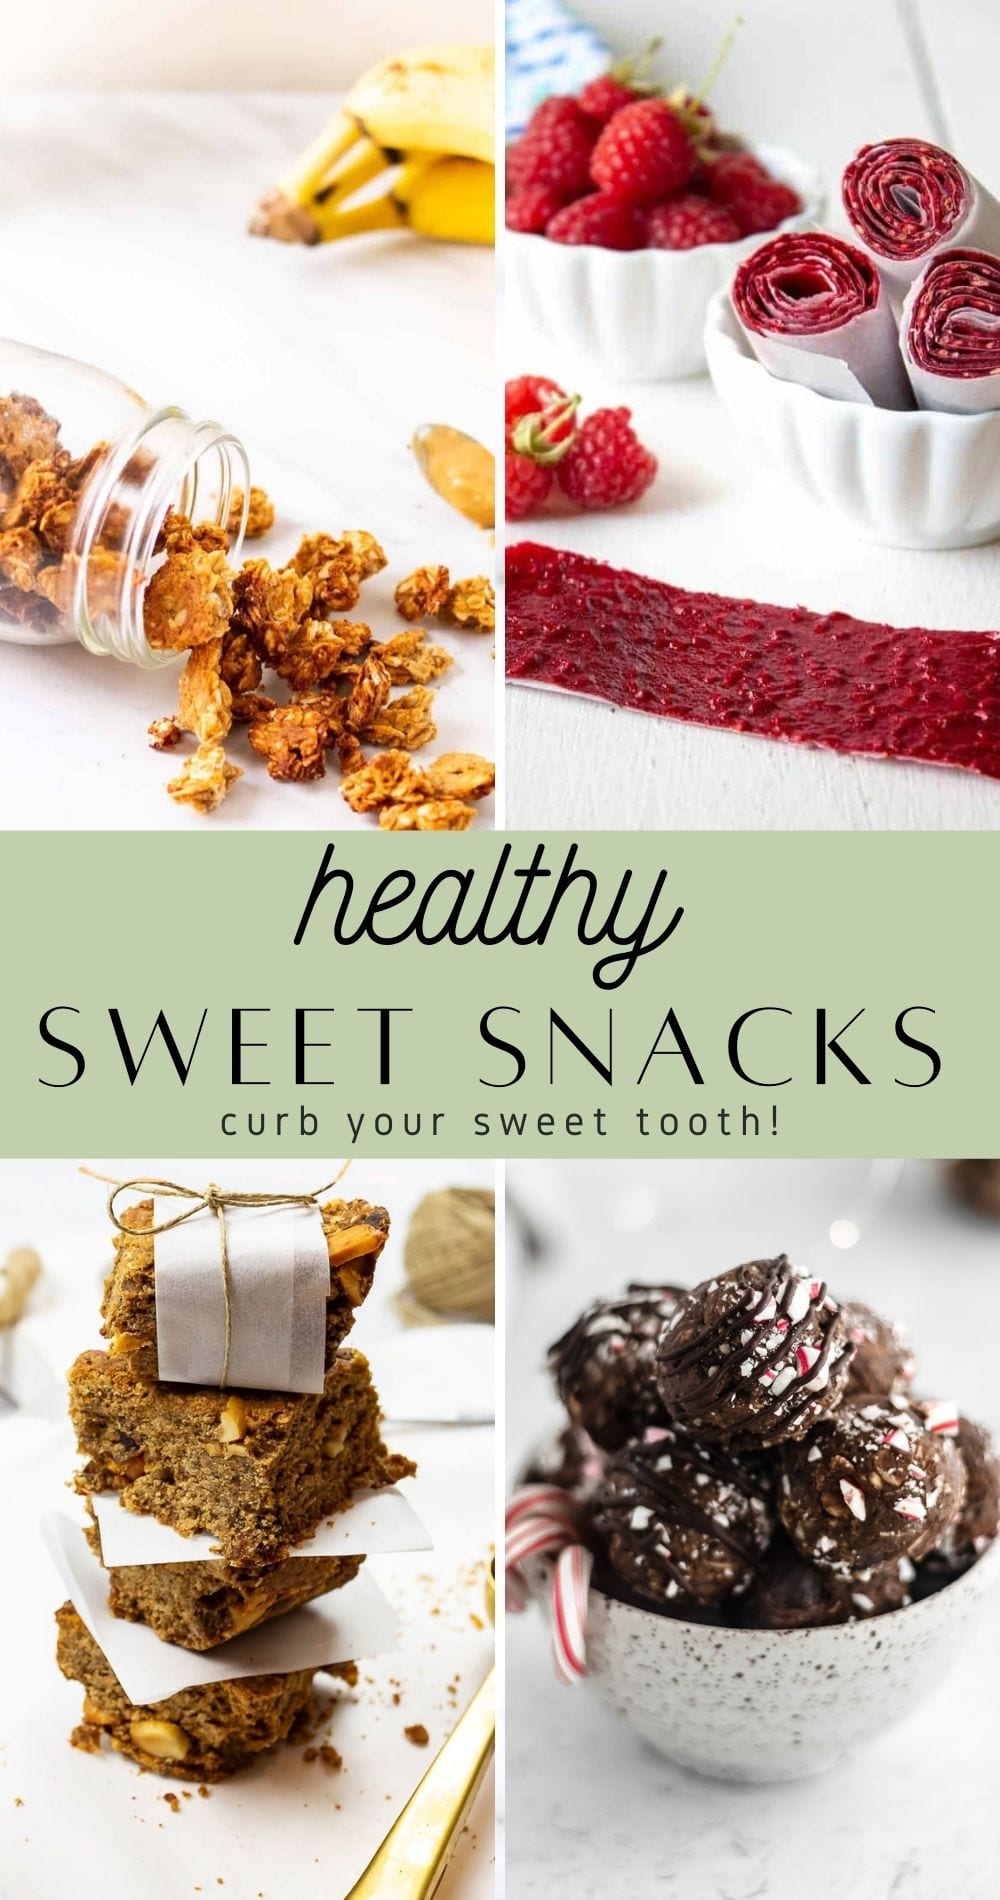 The Best Healthy Sweet Snacks - Healthy Snacks To Satisfy A Sweet Tooth